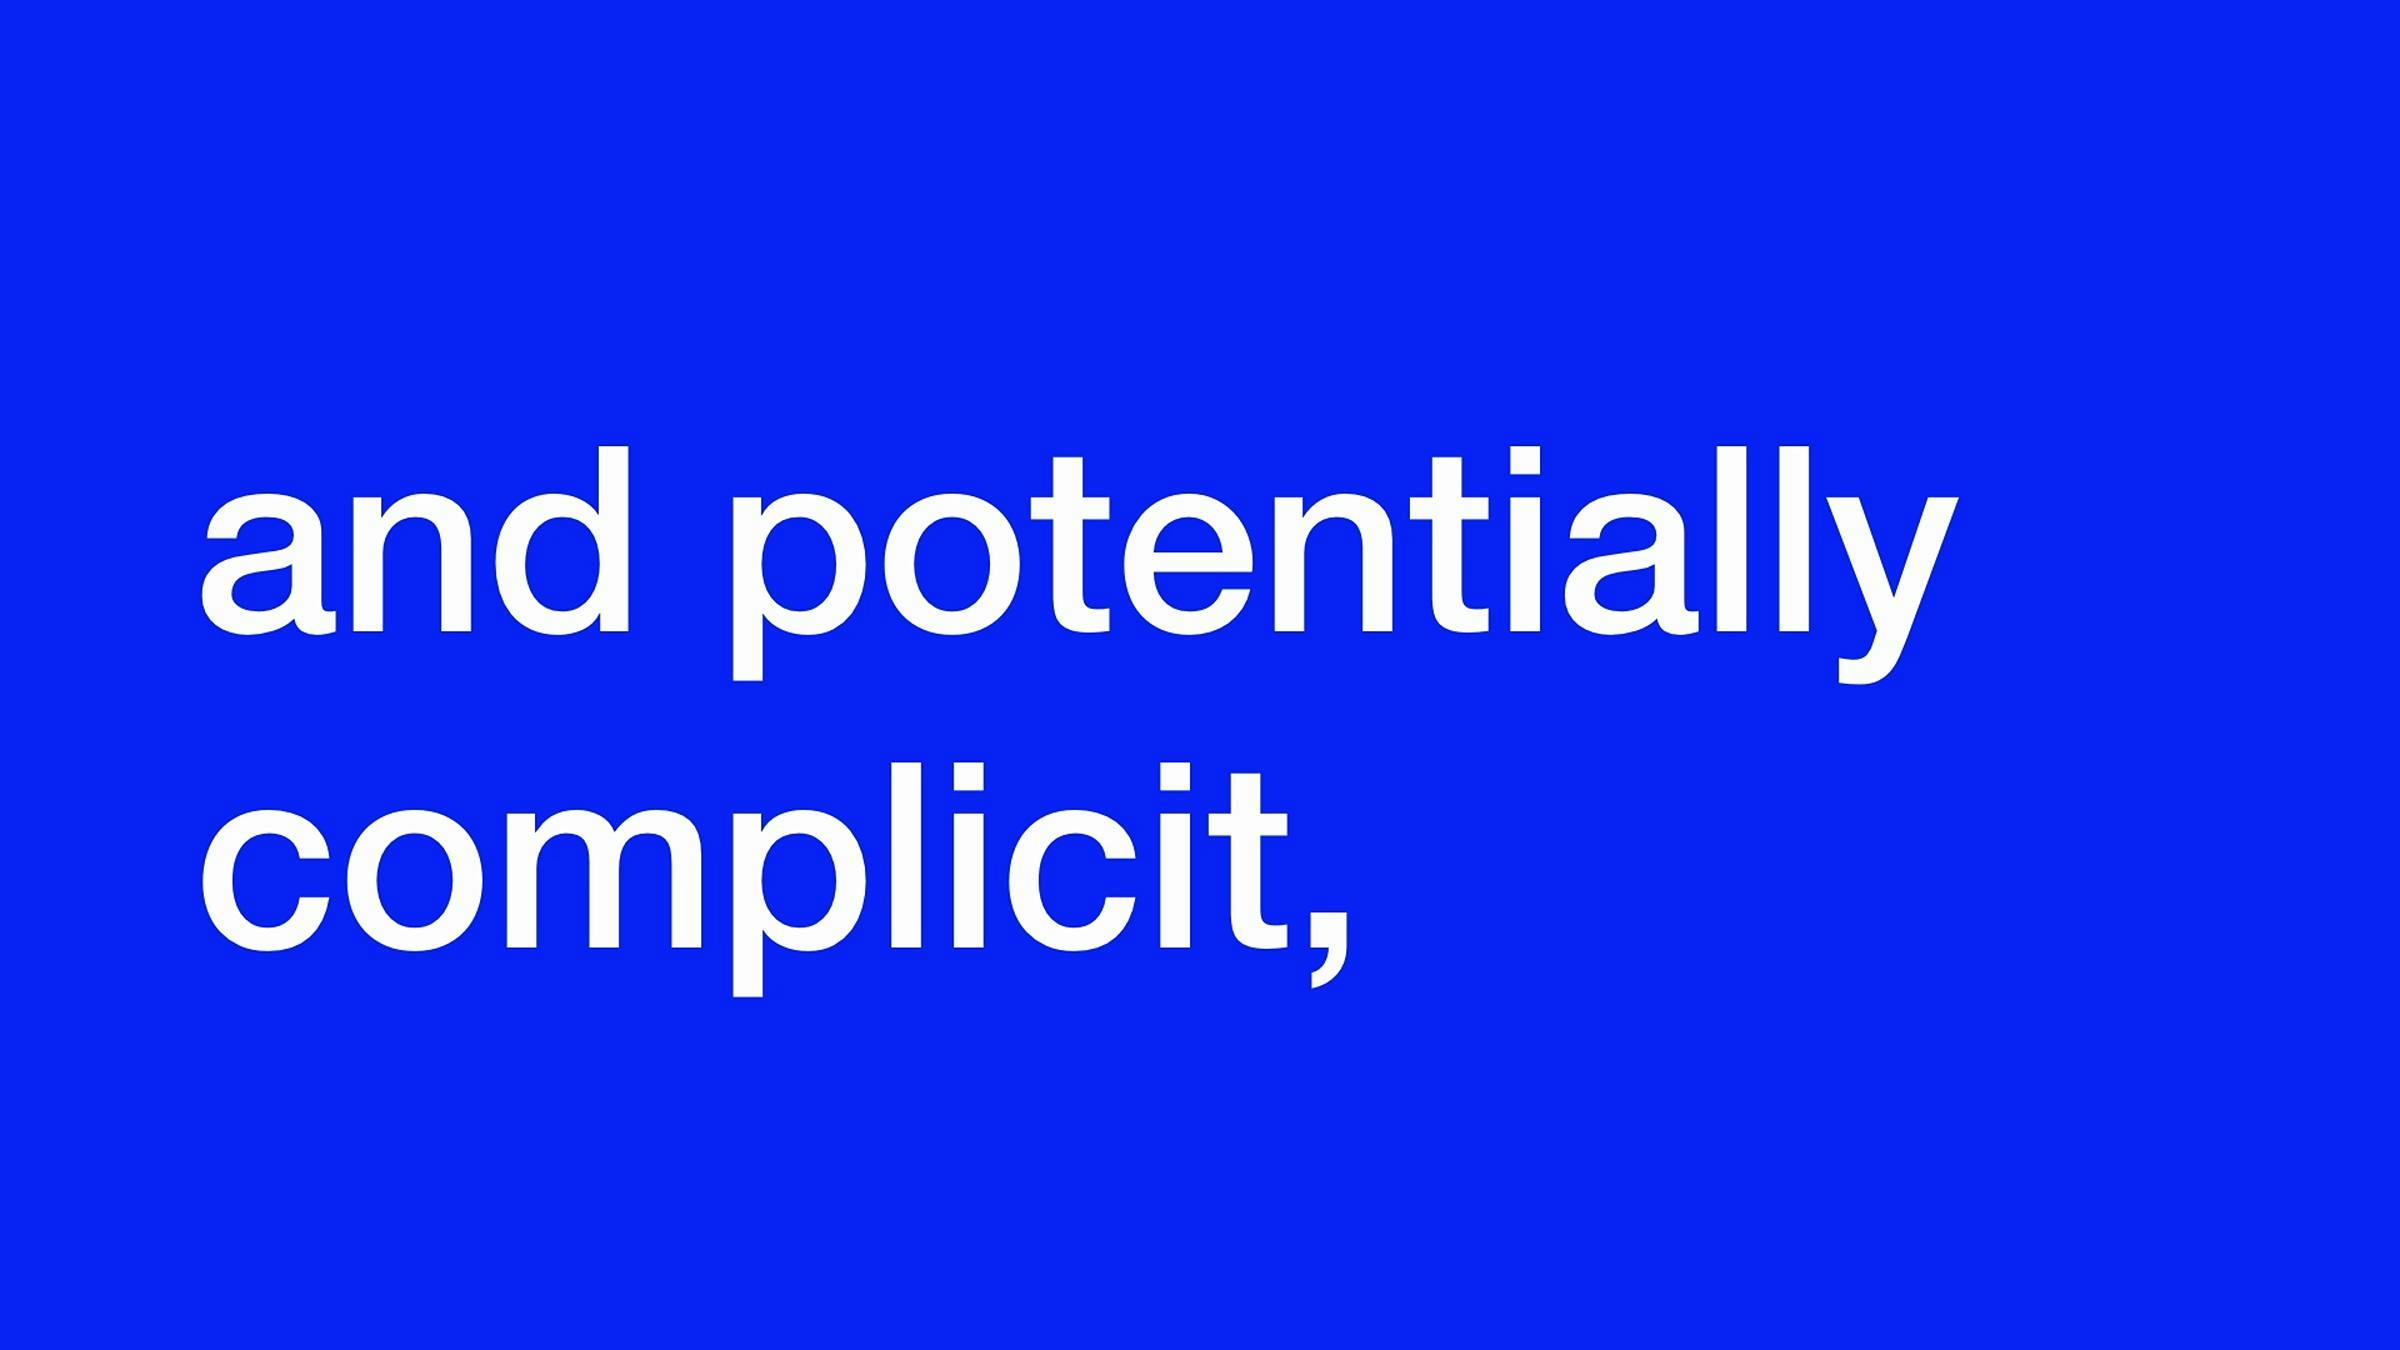 The words 'and potentially complicit,' in white against a blue background.